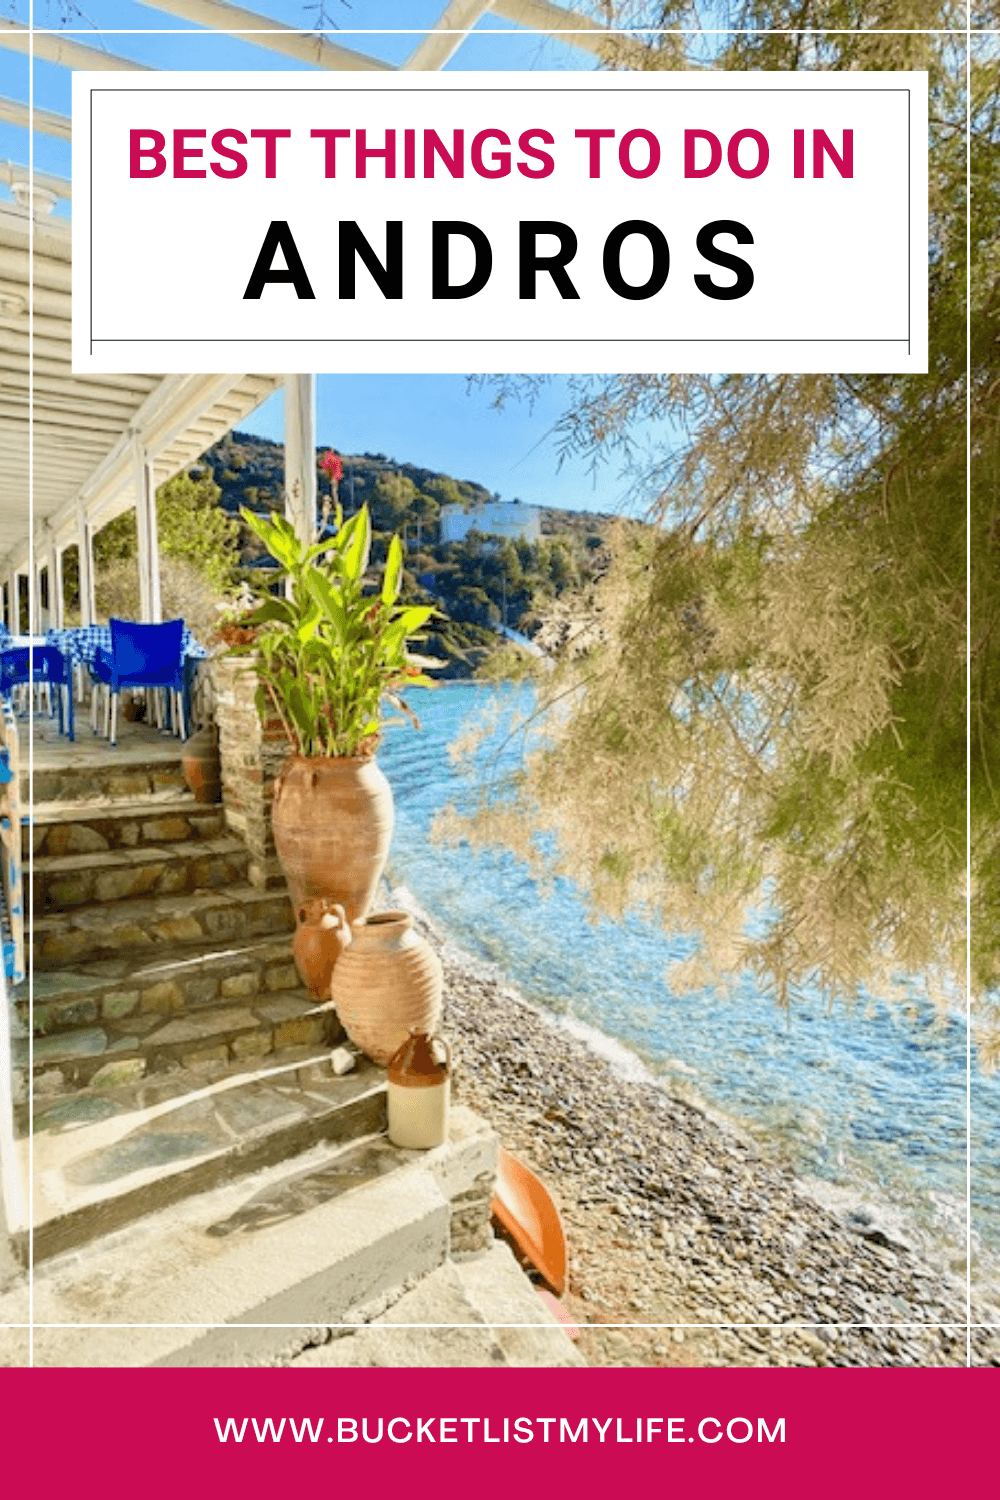 The Best Things to Do in Andros